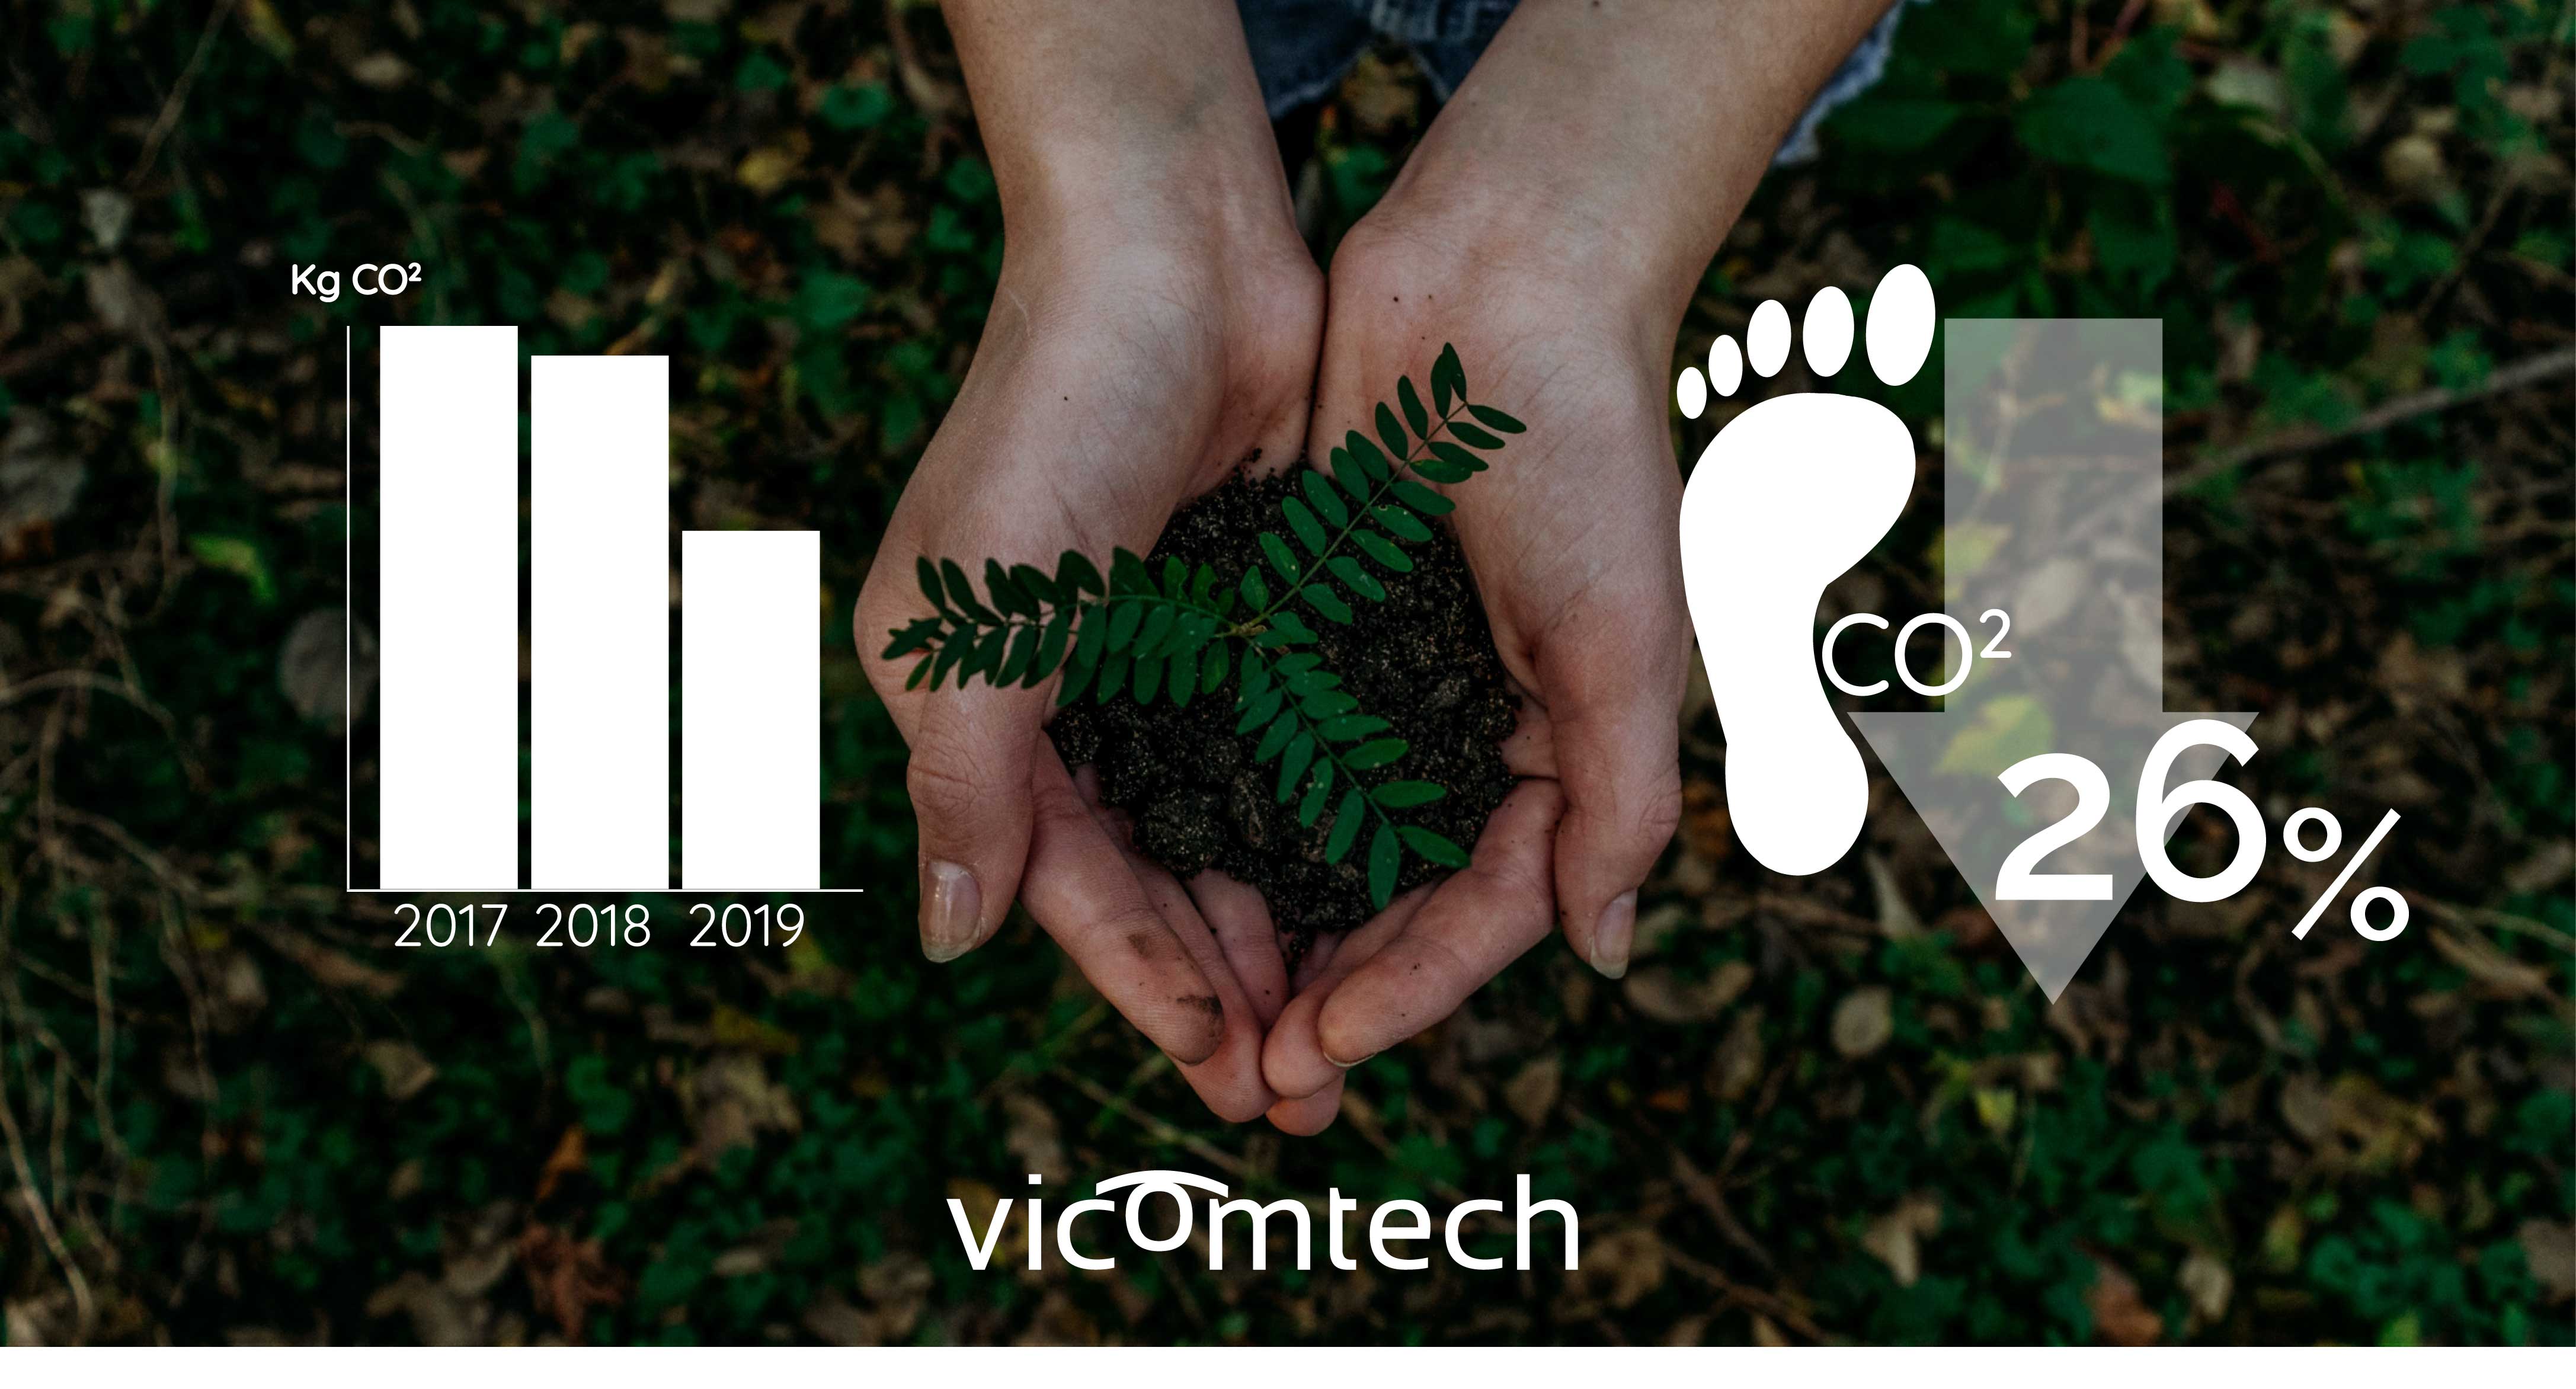 In 2019, Vicomtech's carbon footprint has been reduced by 26%